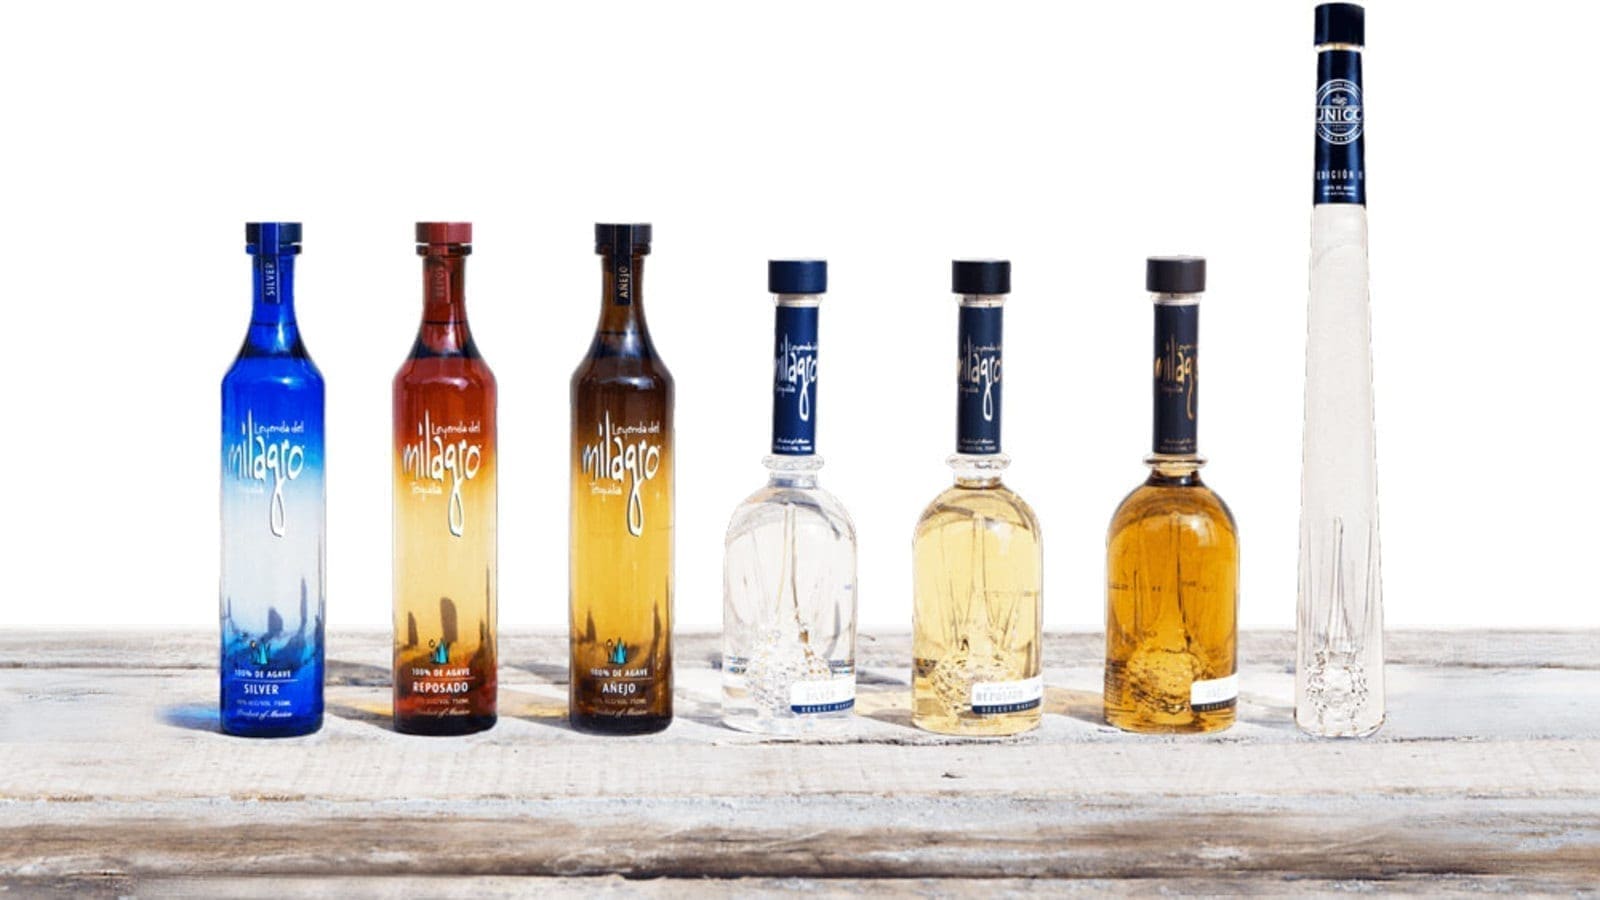 William Grant & Sons supports the growth of Milagro Tequila brand with new acquisition